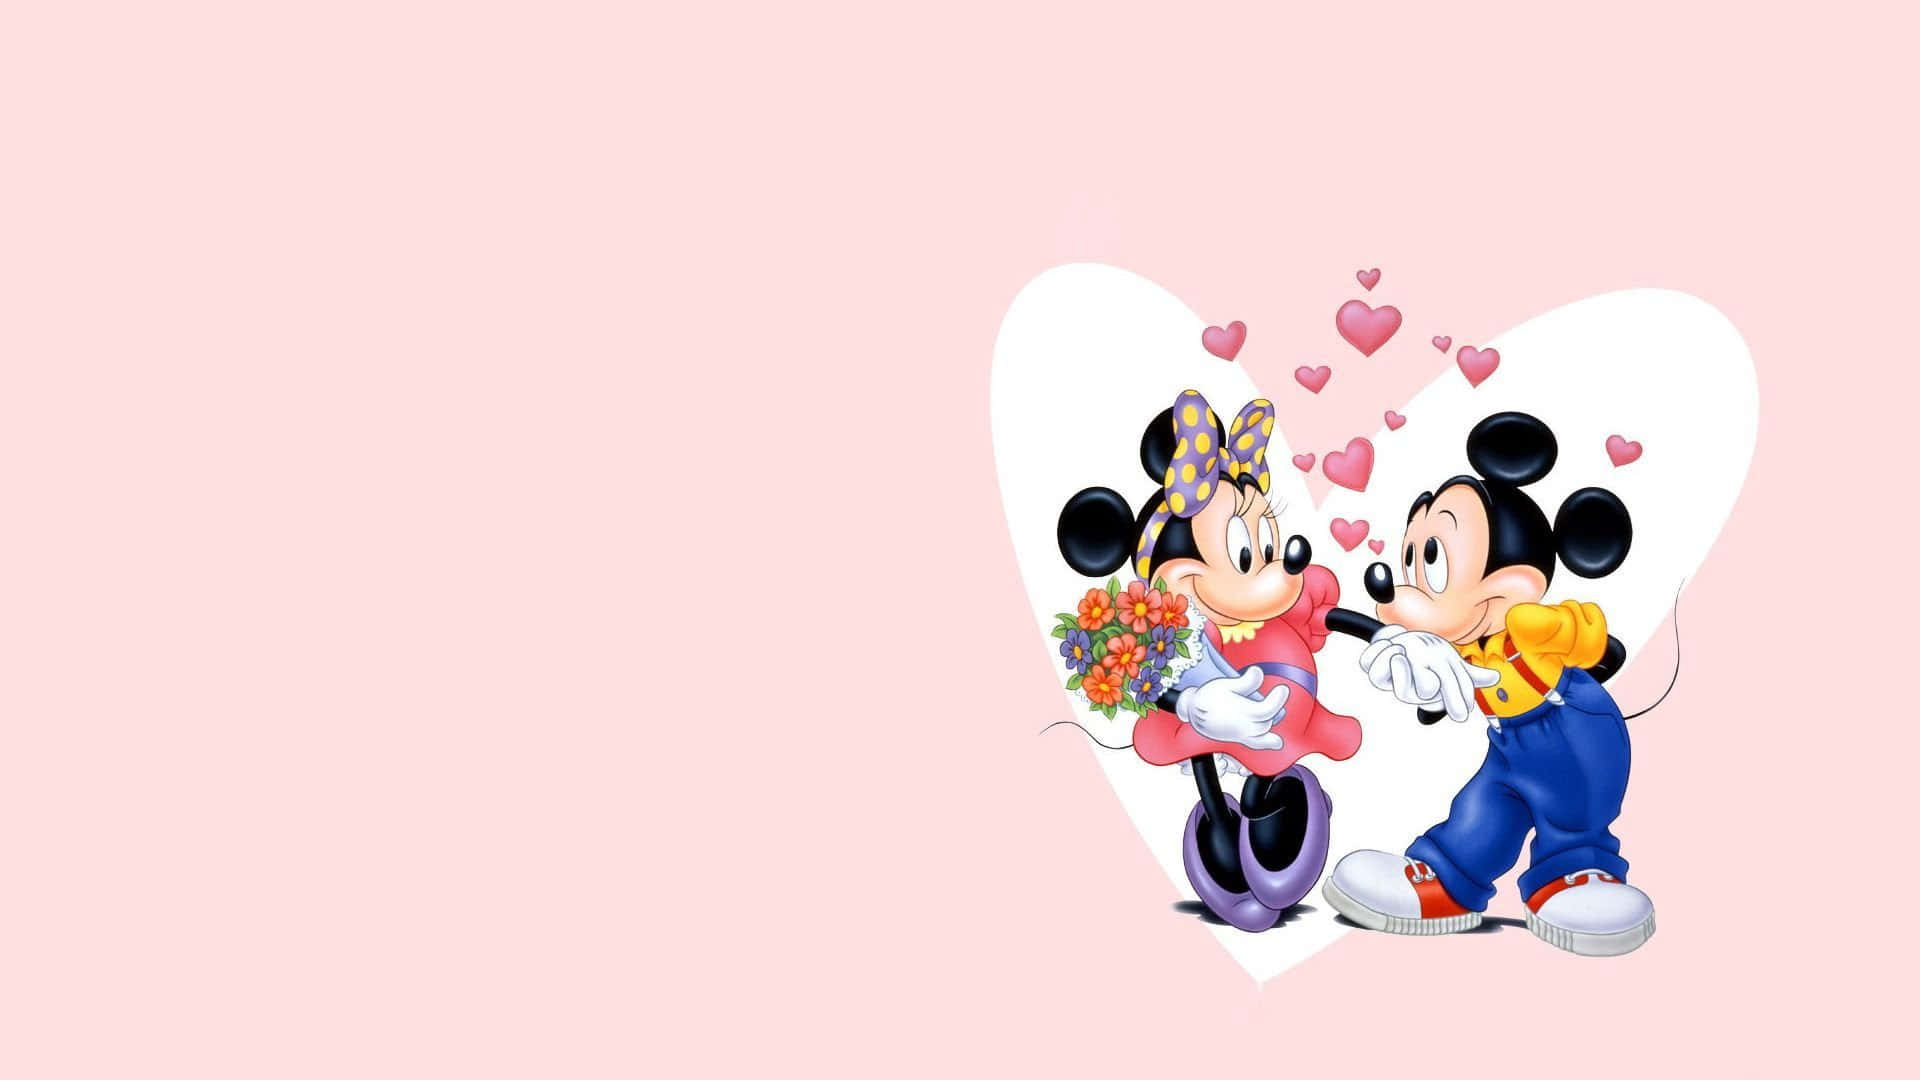 The sweetest couple since 1928: Mickey and Minnie Mouse!